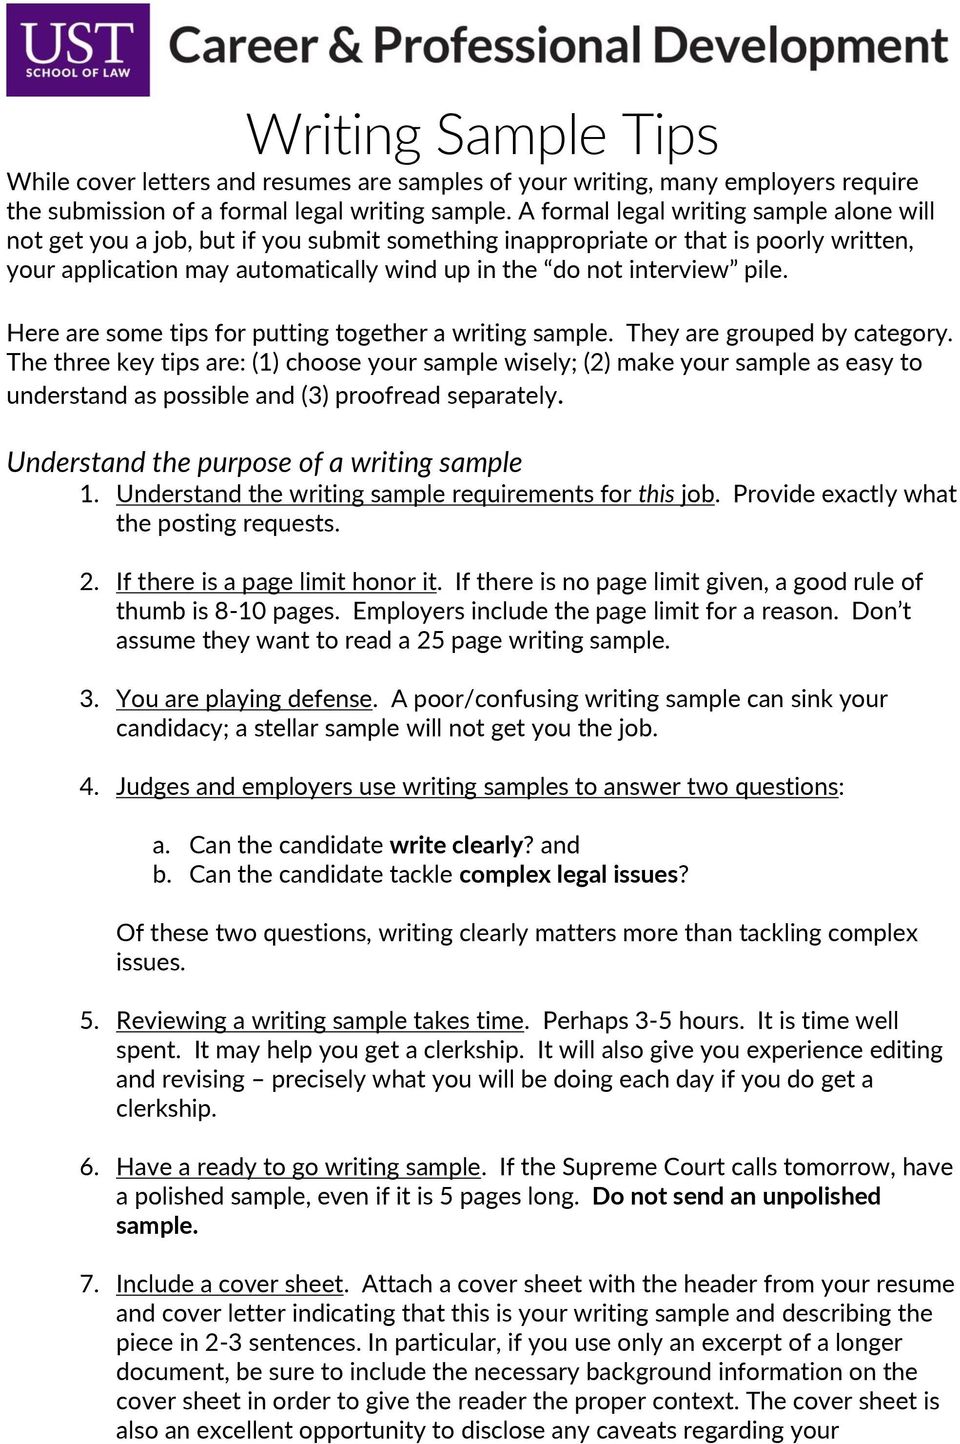 Understand the purpose of a writing sample 30. Understand the